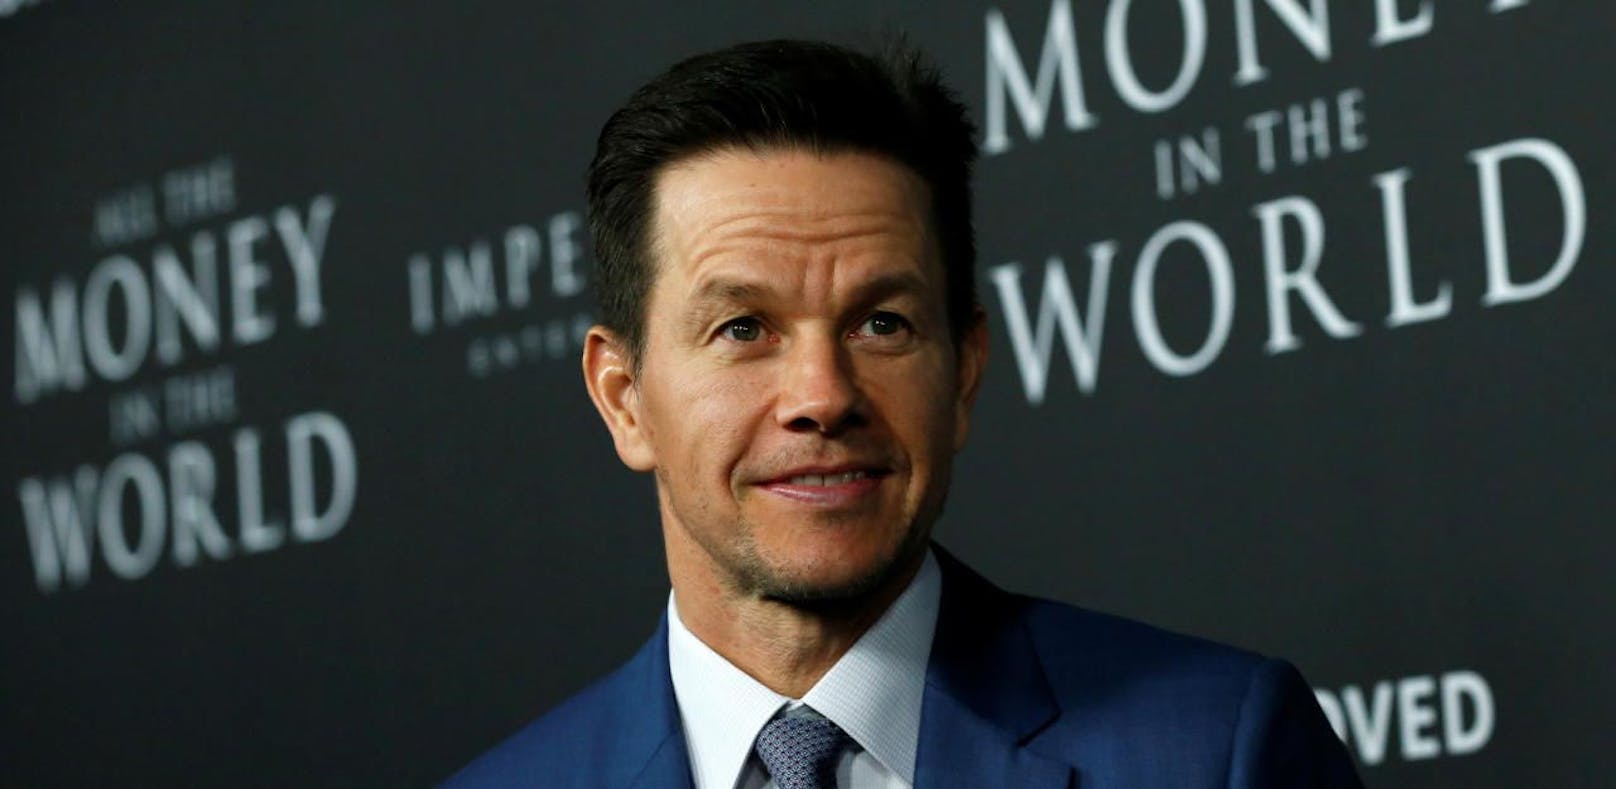 Mark Wahlberg spendet hohe Gage an "Time's Up"